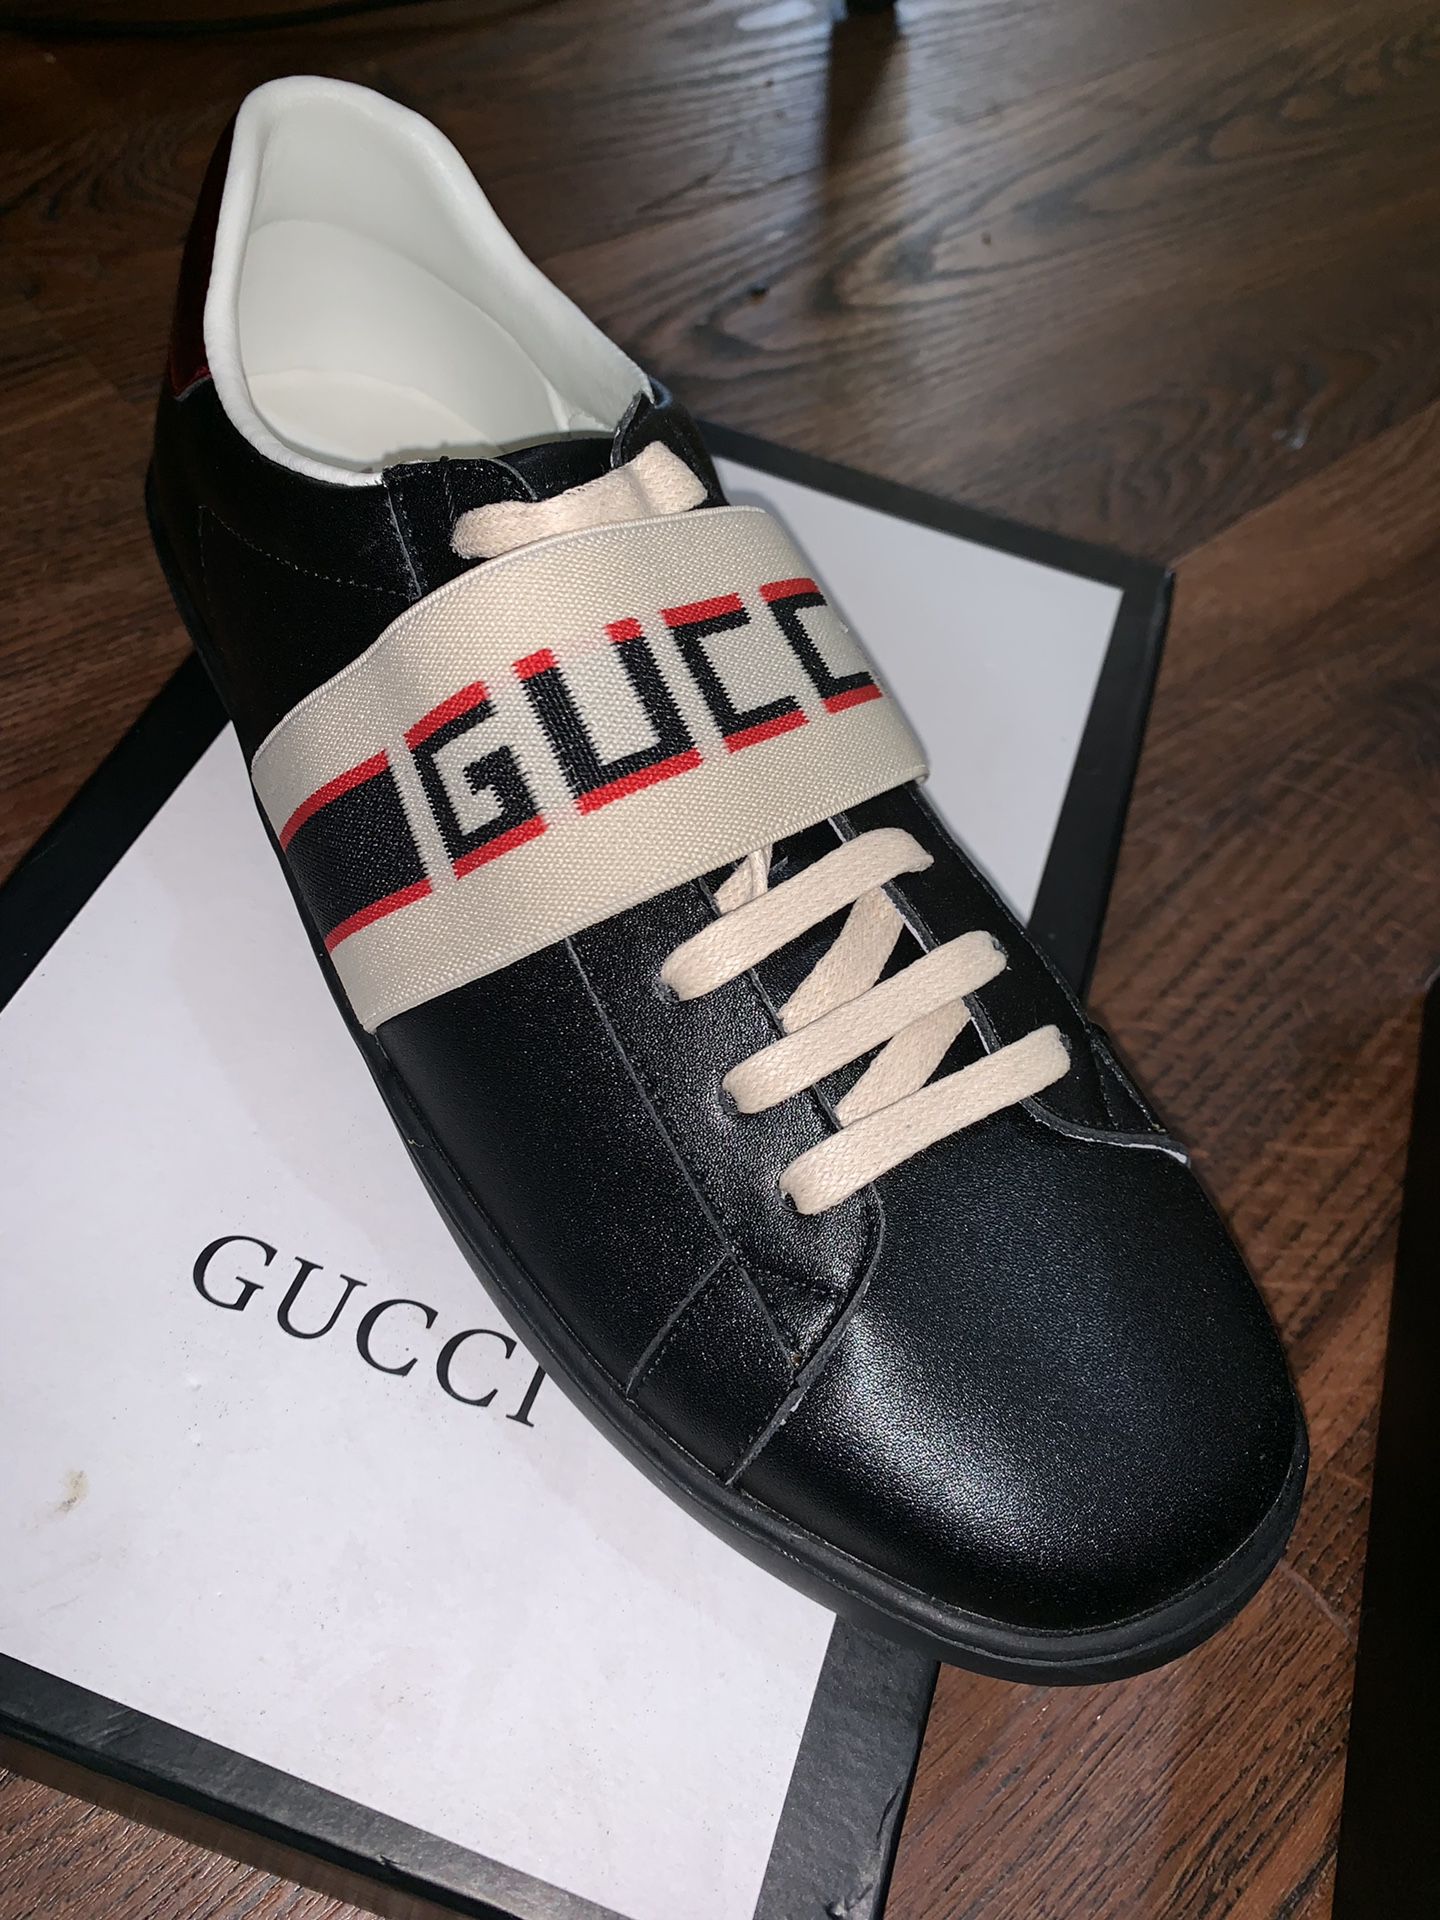 Brand new Gucci Sneakers (size 10)